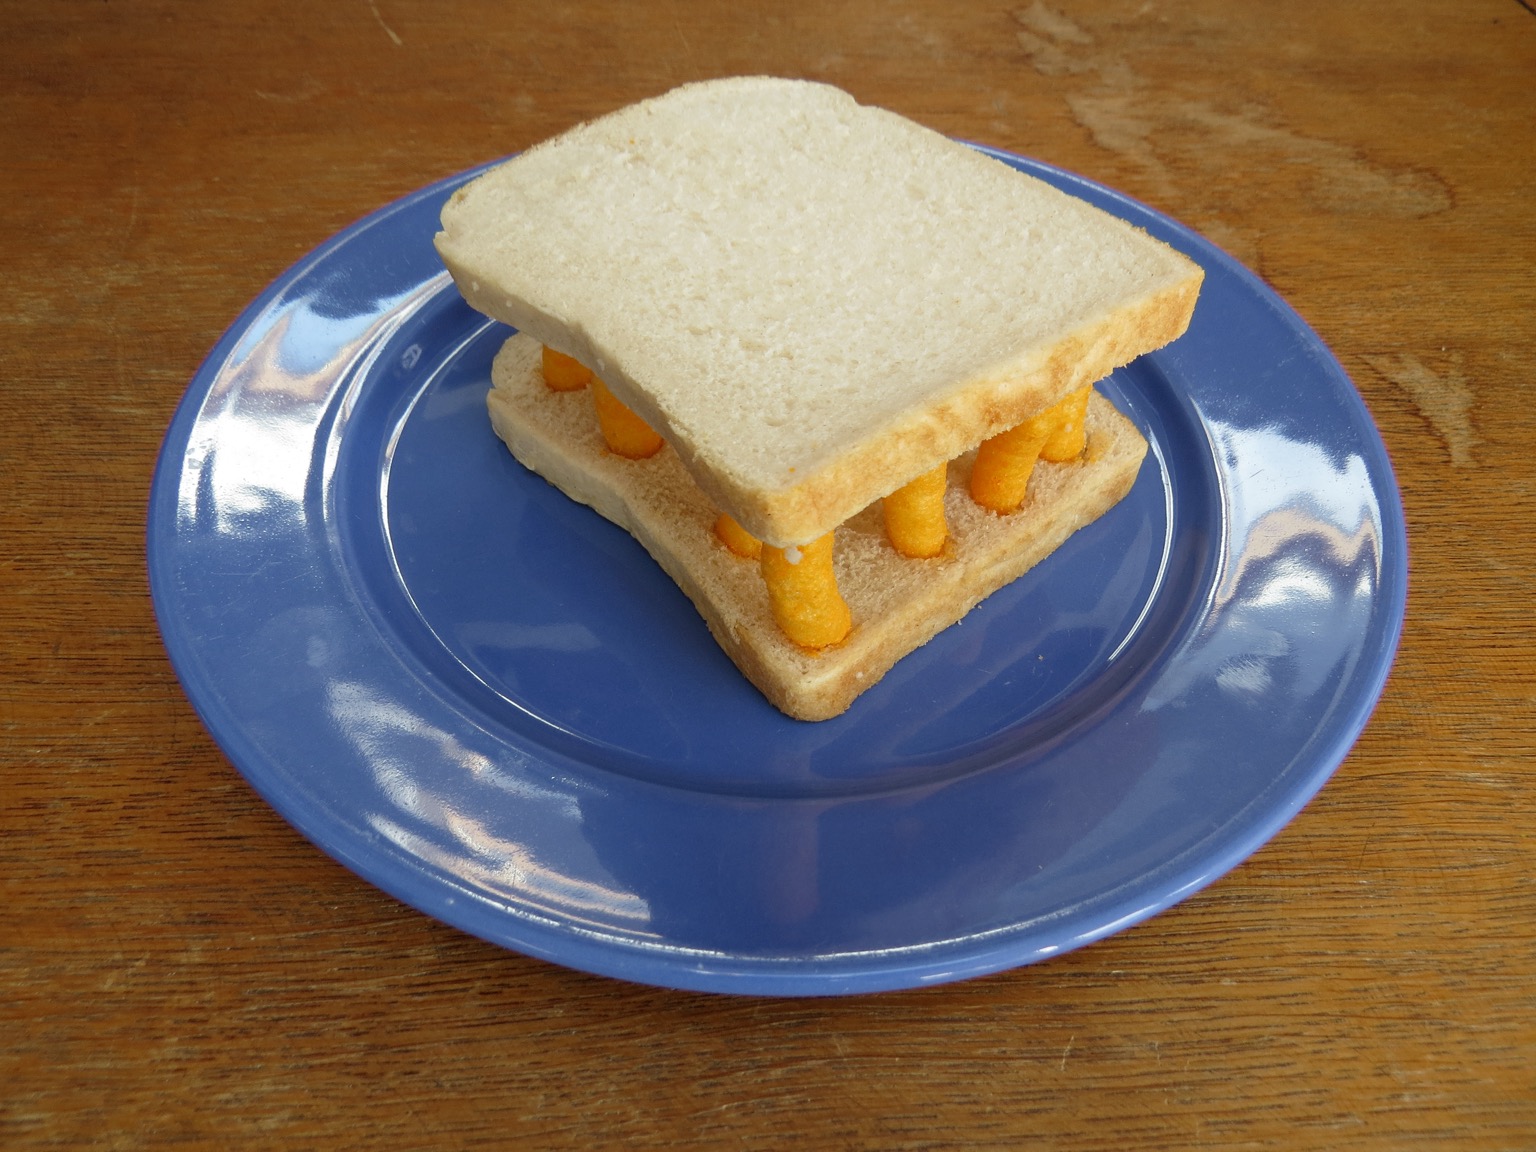 White bread slices with Wotsits columns in between